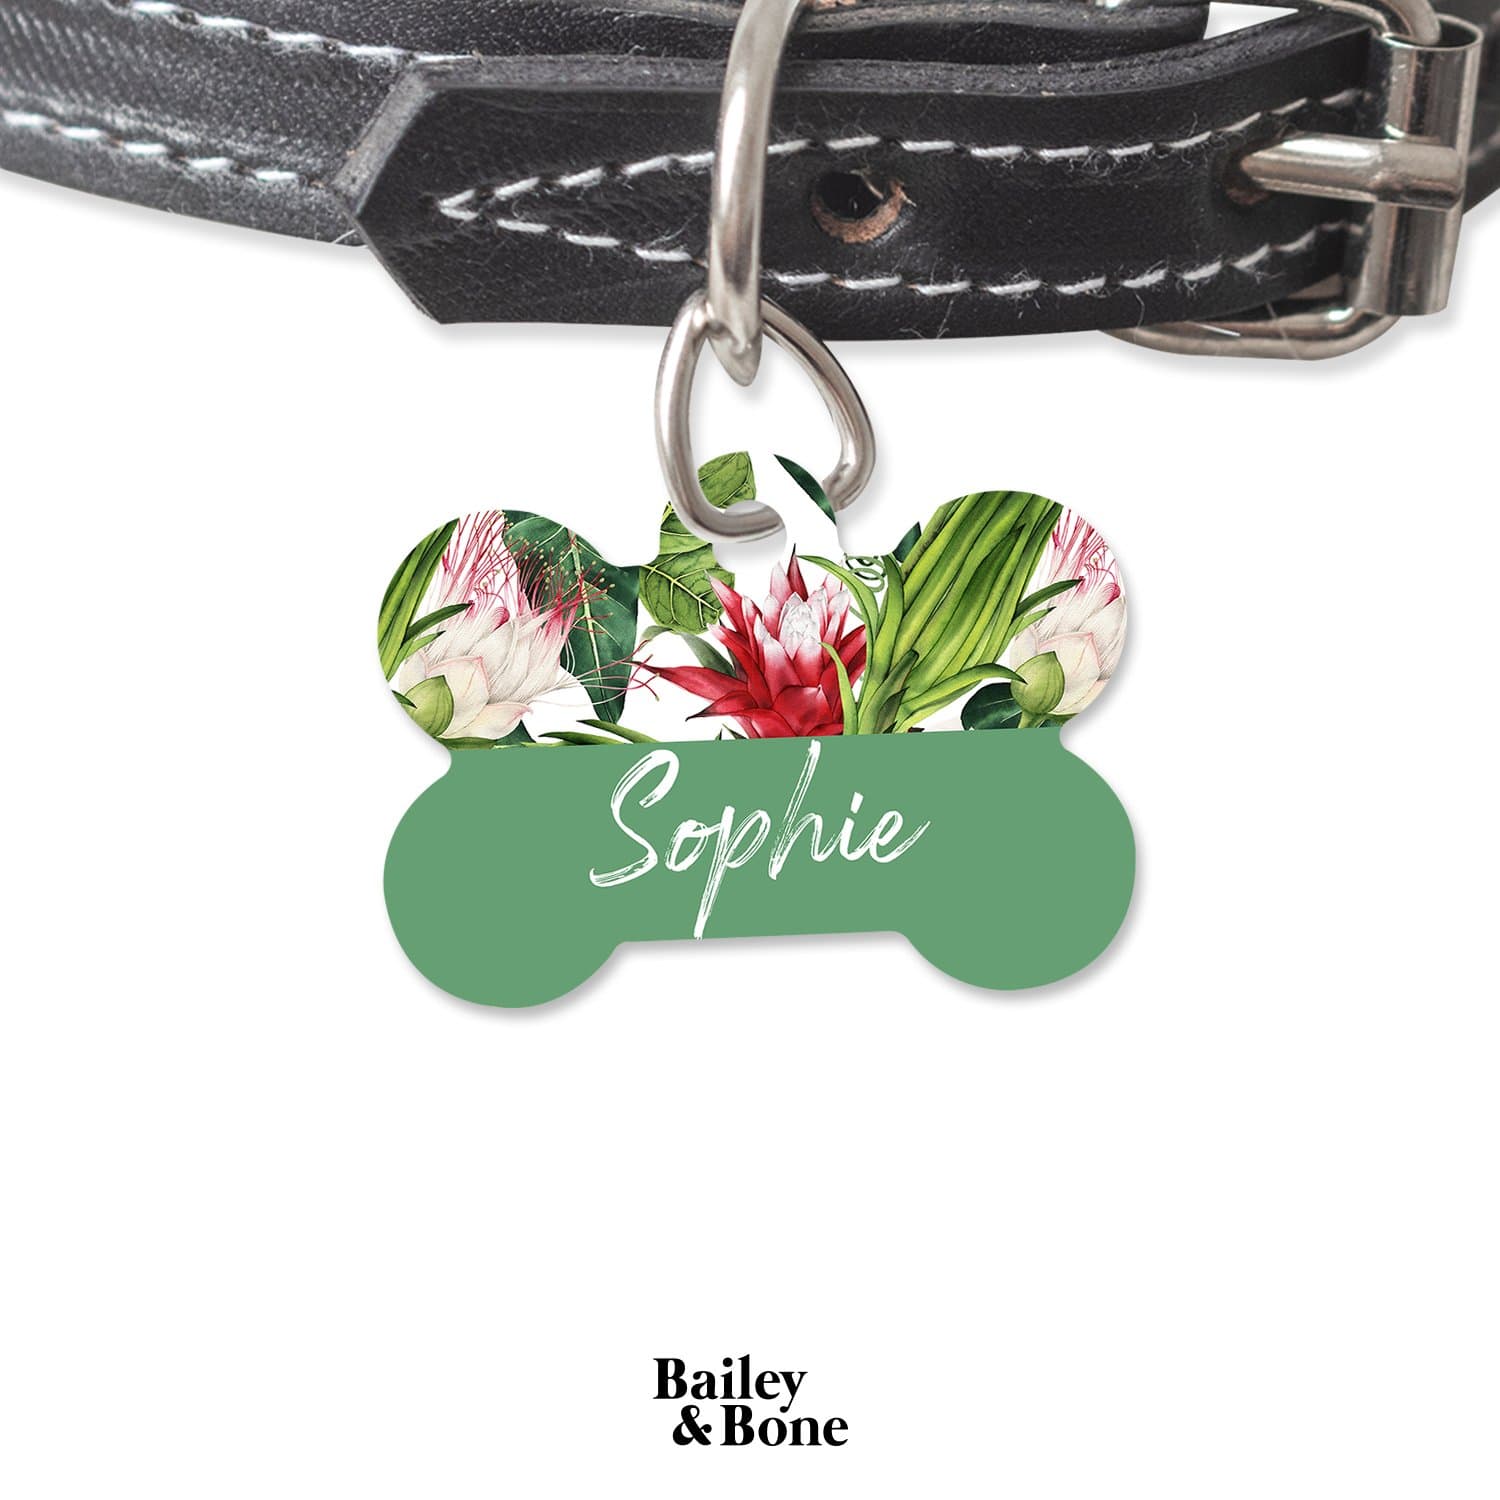 Bailey And Bone Pet Tag Bone Green and Red Floral Pet Tag